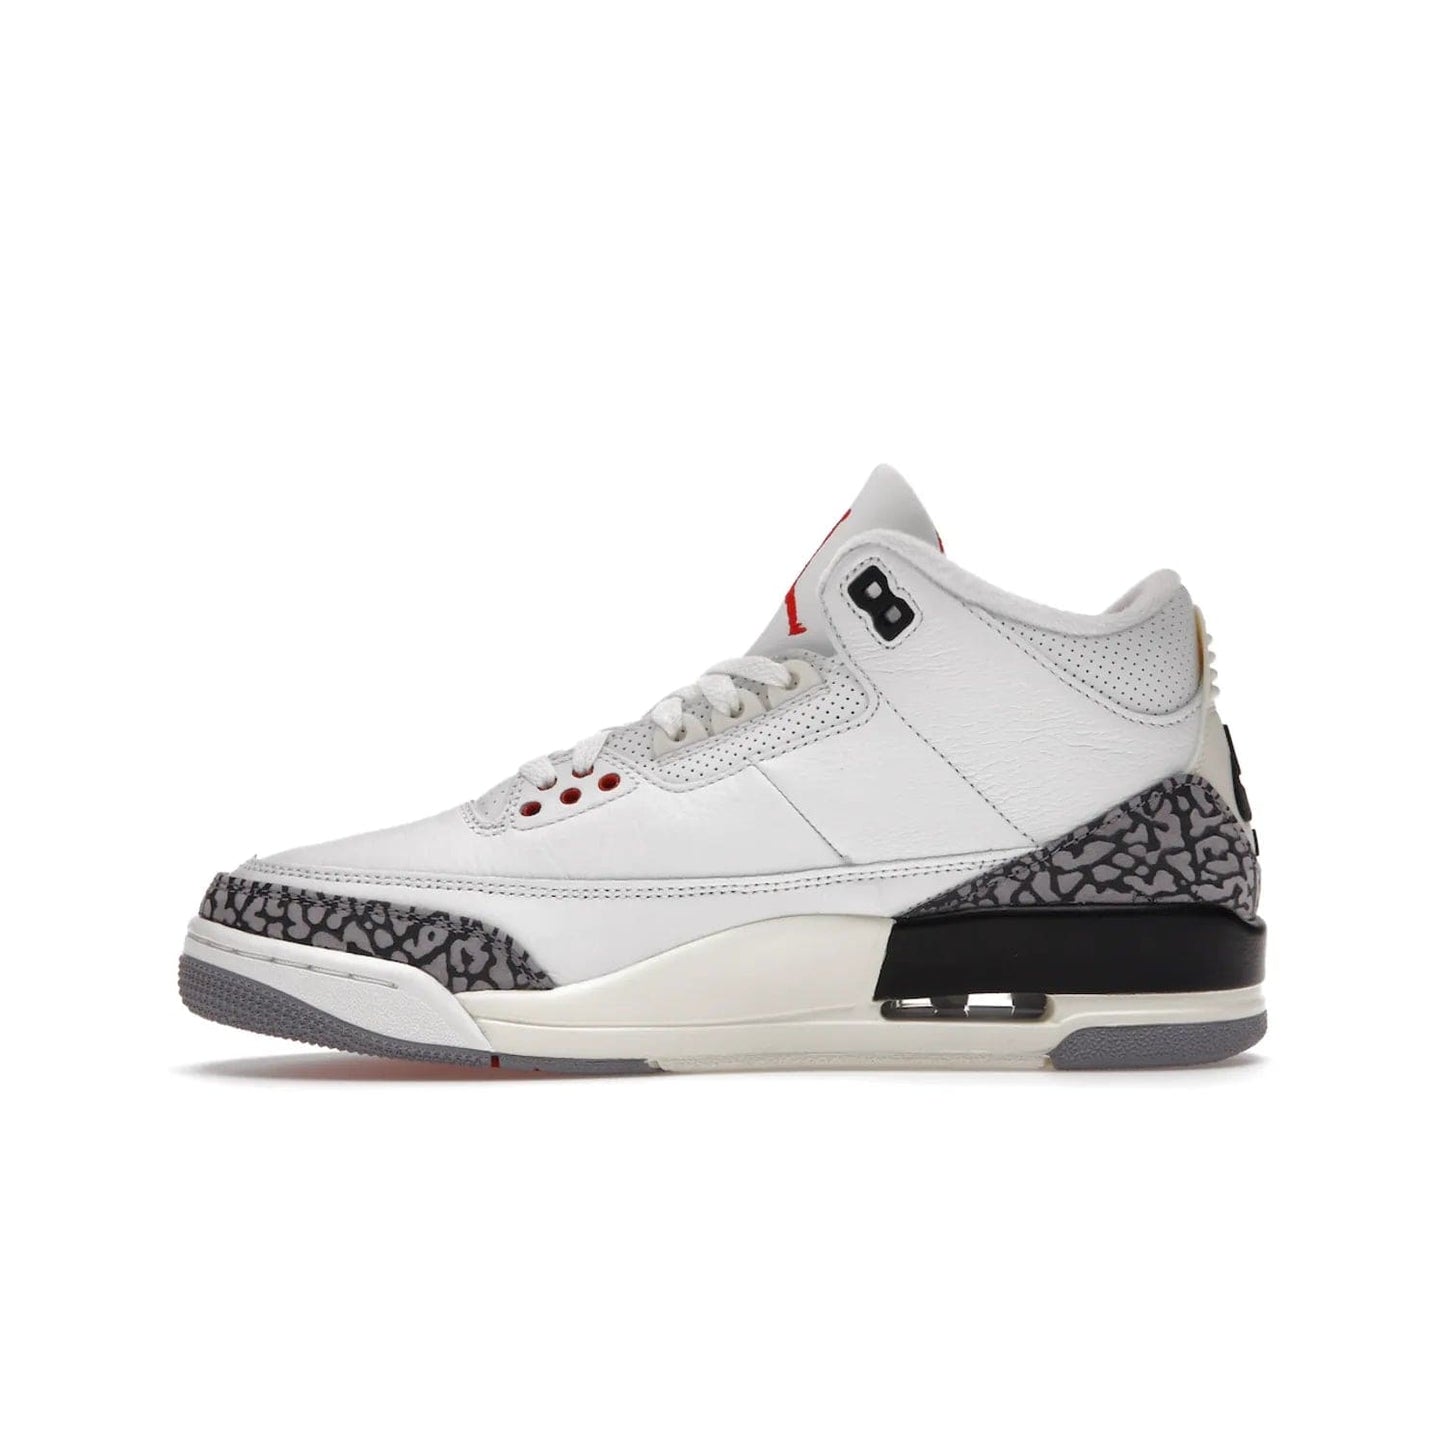 Jordan 3 Retro White Cement Reimagined - Image 19 - Only at www.BallersClubKickz.com - The Reimagined Air Jordan 3 Retro in a Summit White/Fire Red/Black/Cement Grey colorway is launching on March 11, 2023. Featuring a white leather upper, off-white midsoles and heel tabs, this vintage-look sneaker is a must-have.